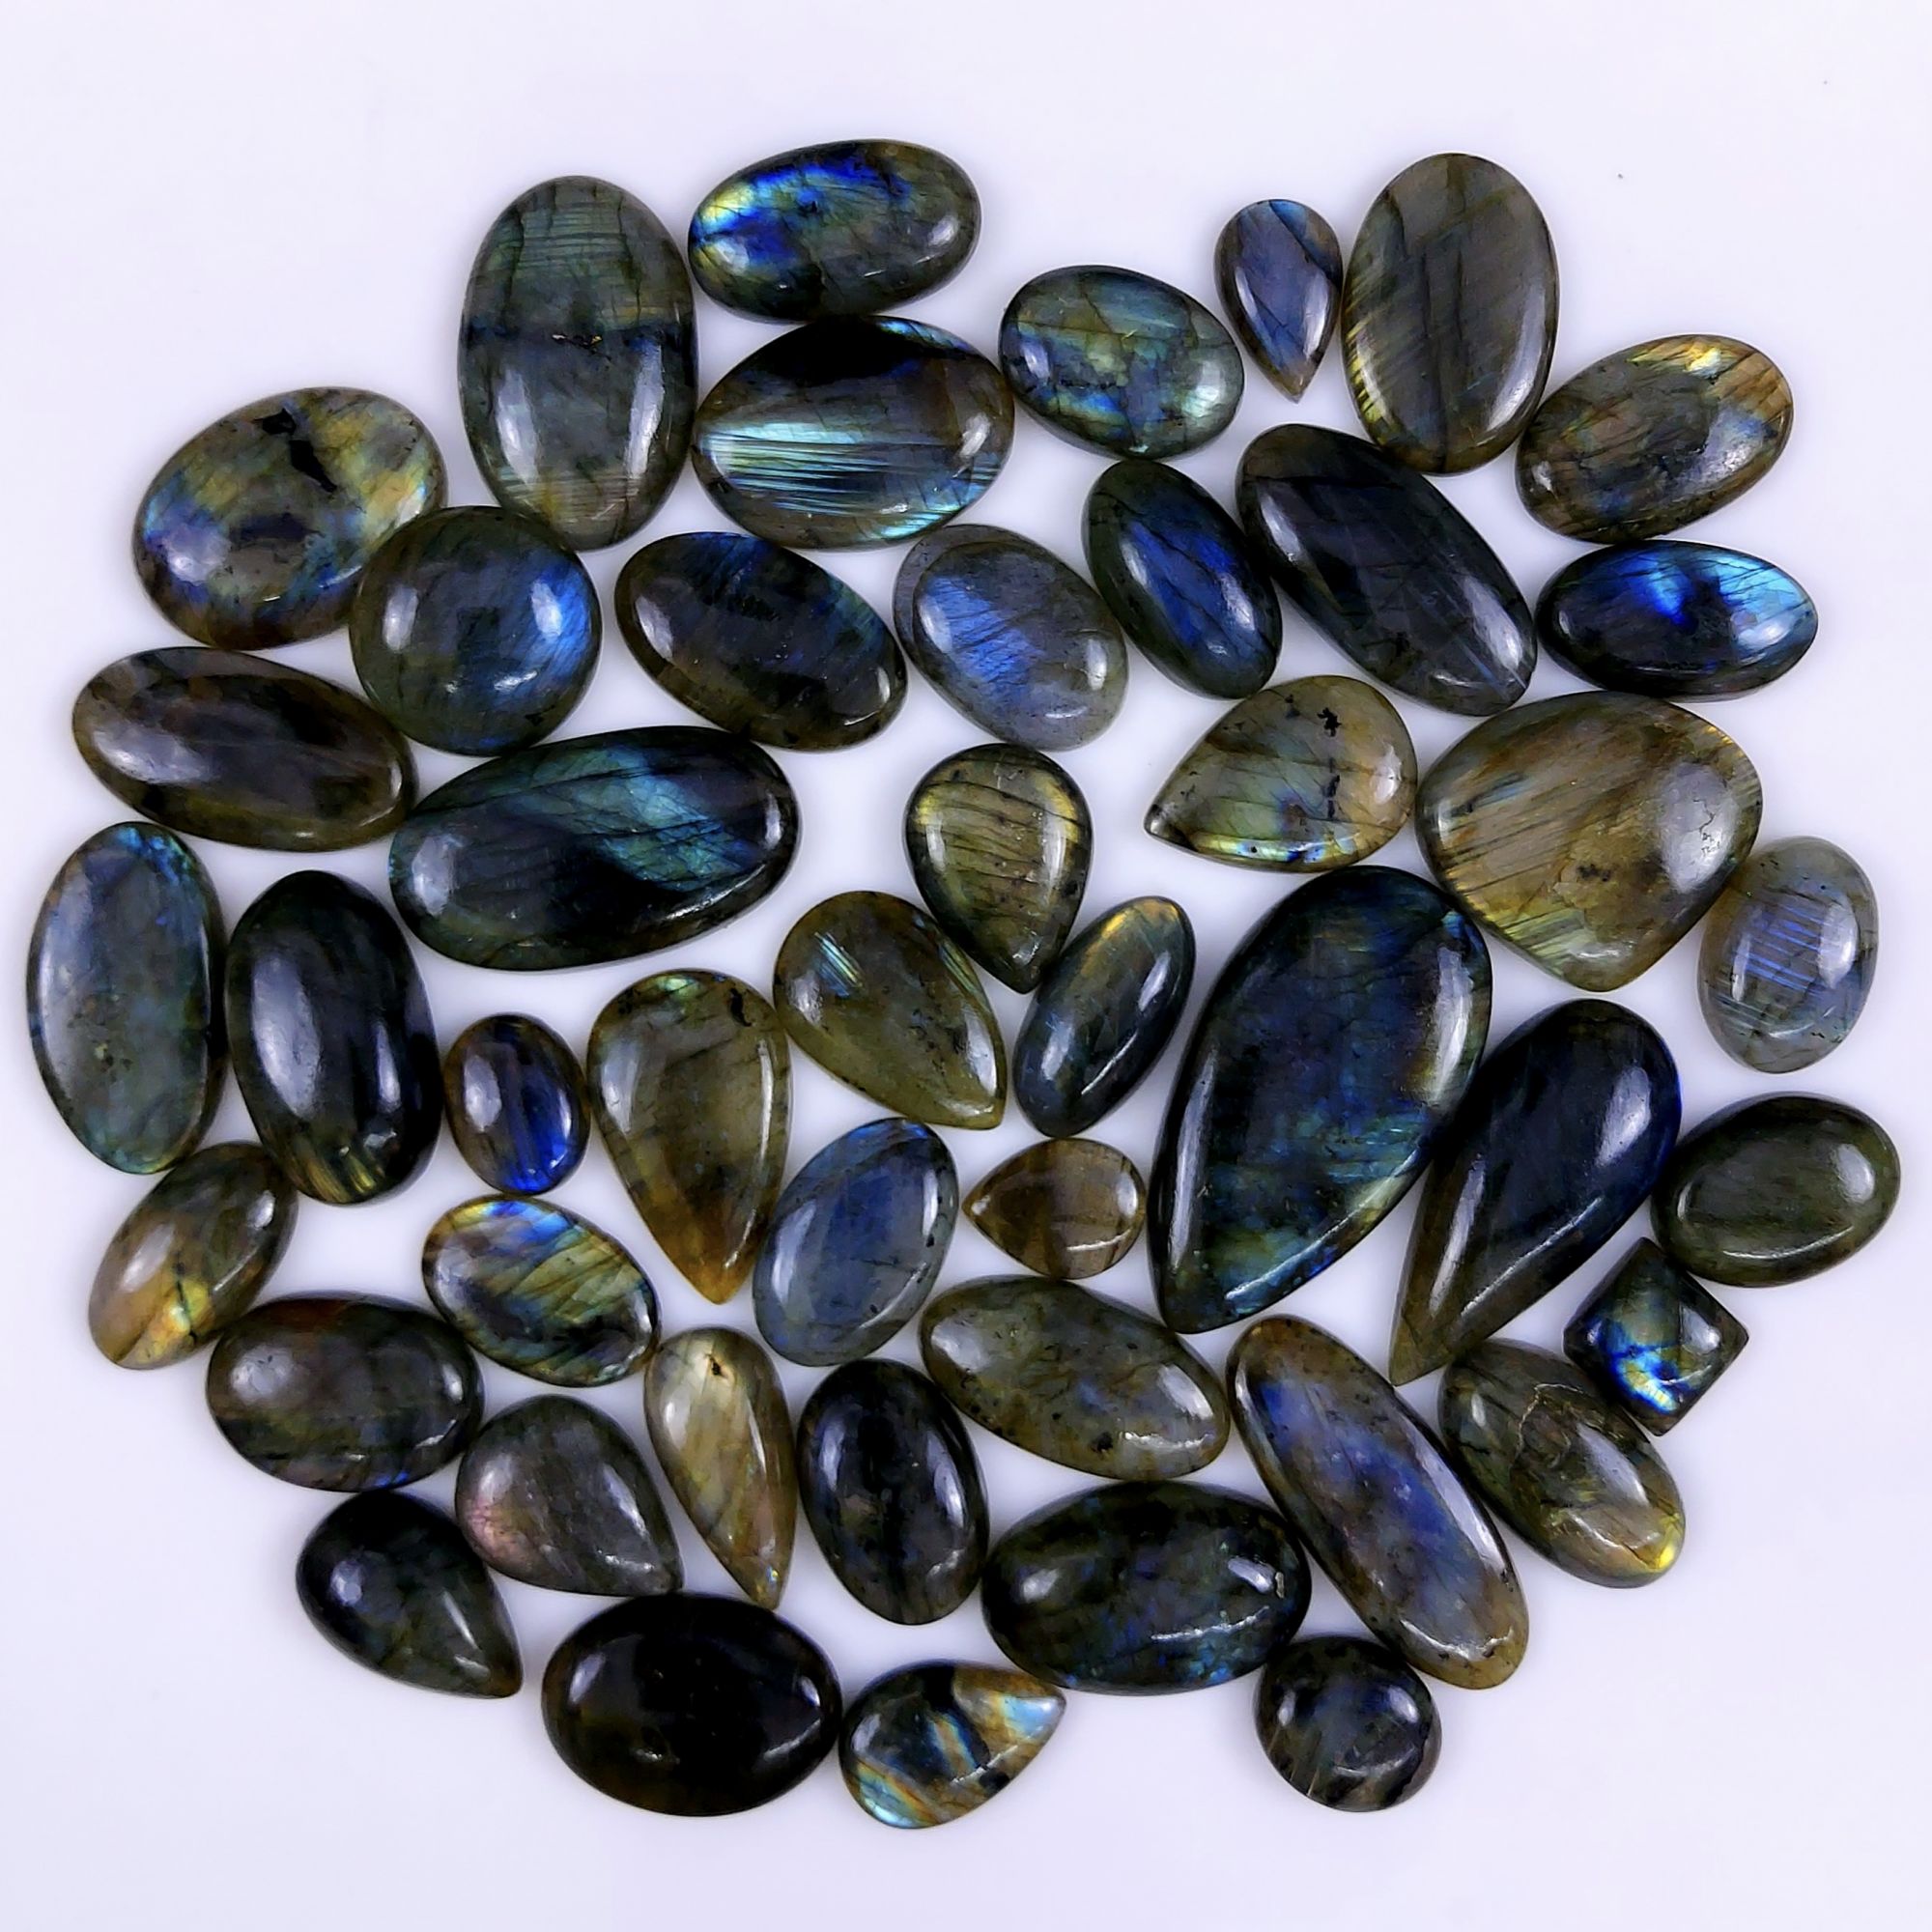 46pc 1668Cts Labradorite Cabochon Multifire Healing Crystal For Jewelry Supplies, Labradorite Necklace Handmade Wire Wrapped Gemstone Pendant 54x28 18x14mm#6268